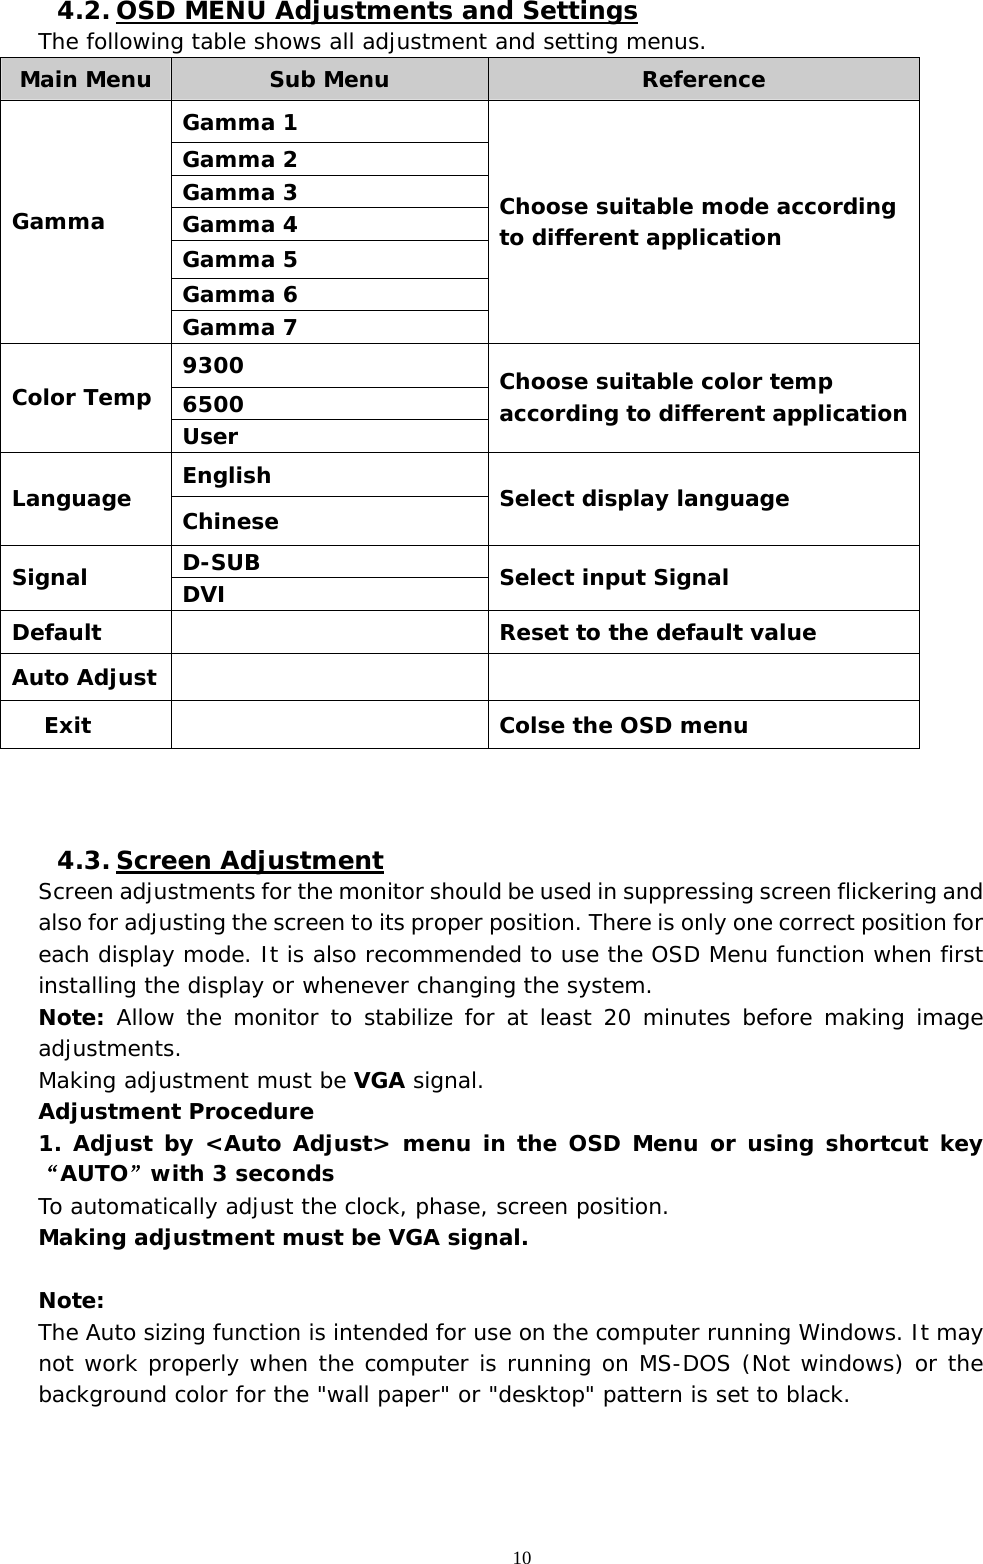   10  4.2. OSD MENU Adjustments and Settings The following table shows all adjustment and setting menus.  Main Menu  Sub Menu  Reference Gamma 1 Gamma 2 Gamma 3 Gamma 4 Gamma 5 Gamma 6 Gamma Gamma 7 Choose suitable mode according to different application 9300 6500 Color Temp User Choose suitable color temp according to different application English Language  Chinese  Select display language D-SUB Signal  DVI  Select input Signal Default    Reset to the default value Auto Adjust     Exit     Colse the OSD menu    4.3. Screen Adjustment Screen adjustments for the monitor should be used in suppressing screen flickering and also for adjusting the screen to its proper position. There is only one correct position for each display mode. It is also recommended to use the OSD Menu function when first installing the display or whenever changing the system.  Note: Allow the monitor to stabilize for at least 20 minutes before making image adjustments. Making adjustment must be VGA signal. Adjustment Procedure 1. Adjust by &lt;Auto Adjust&gt; menu in the OSD Menu or using shortcut key “AUTO”with 3 seconds  To automatically adjust the clock, phase, screen position.  Making adjustment must be VGA signal.  Note: The Auto sizing function is intended for use on the computer running Windows. It may not work properly when the computer is running on MS-DOS (Not windows) or the background color for the &quot;wall paper&quot; or &quot;desktop&quot; pattern is set to black.    